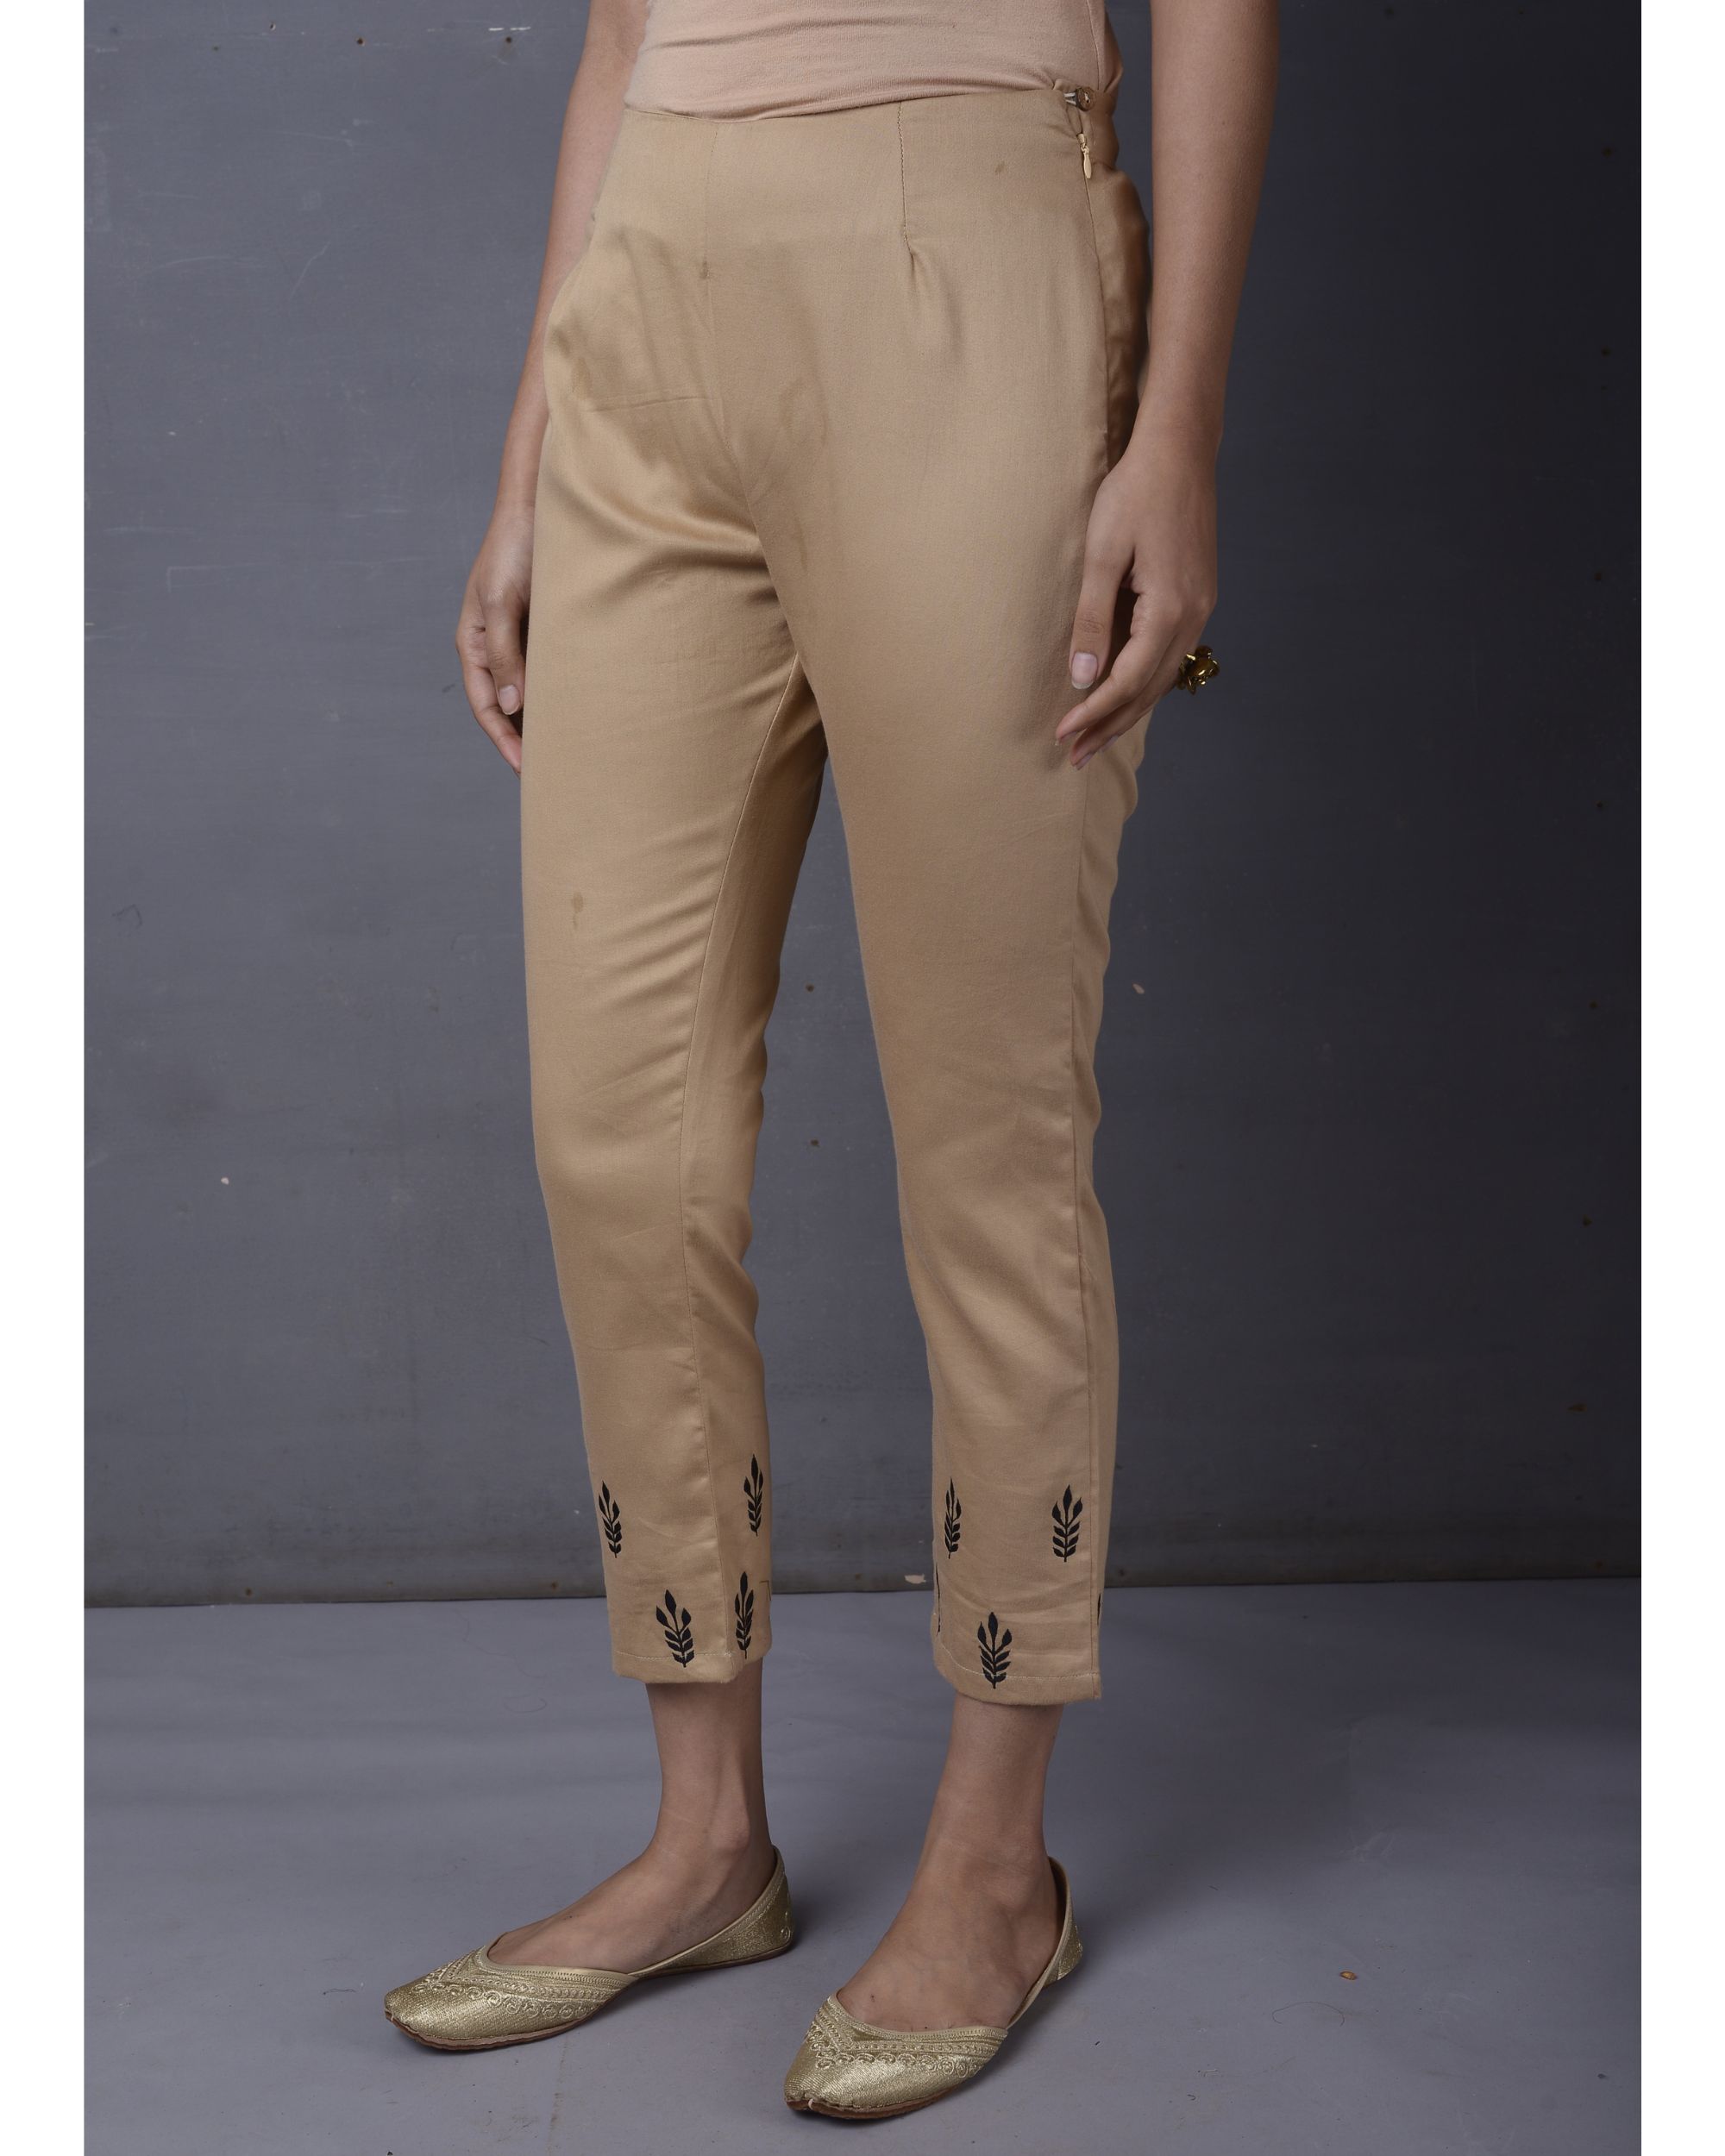 Buy Navy Blue and Beige Combo of 2 Women Straight Trousers Cotton for Best  Price, Reviews, Free Shipping